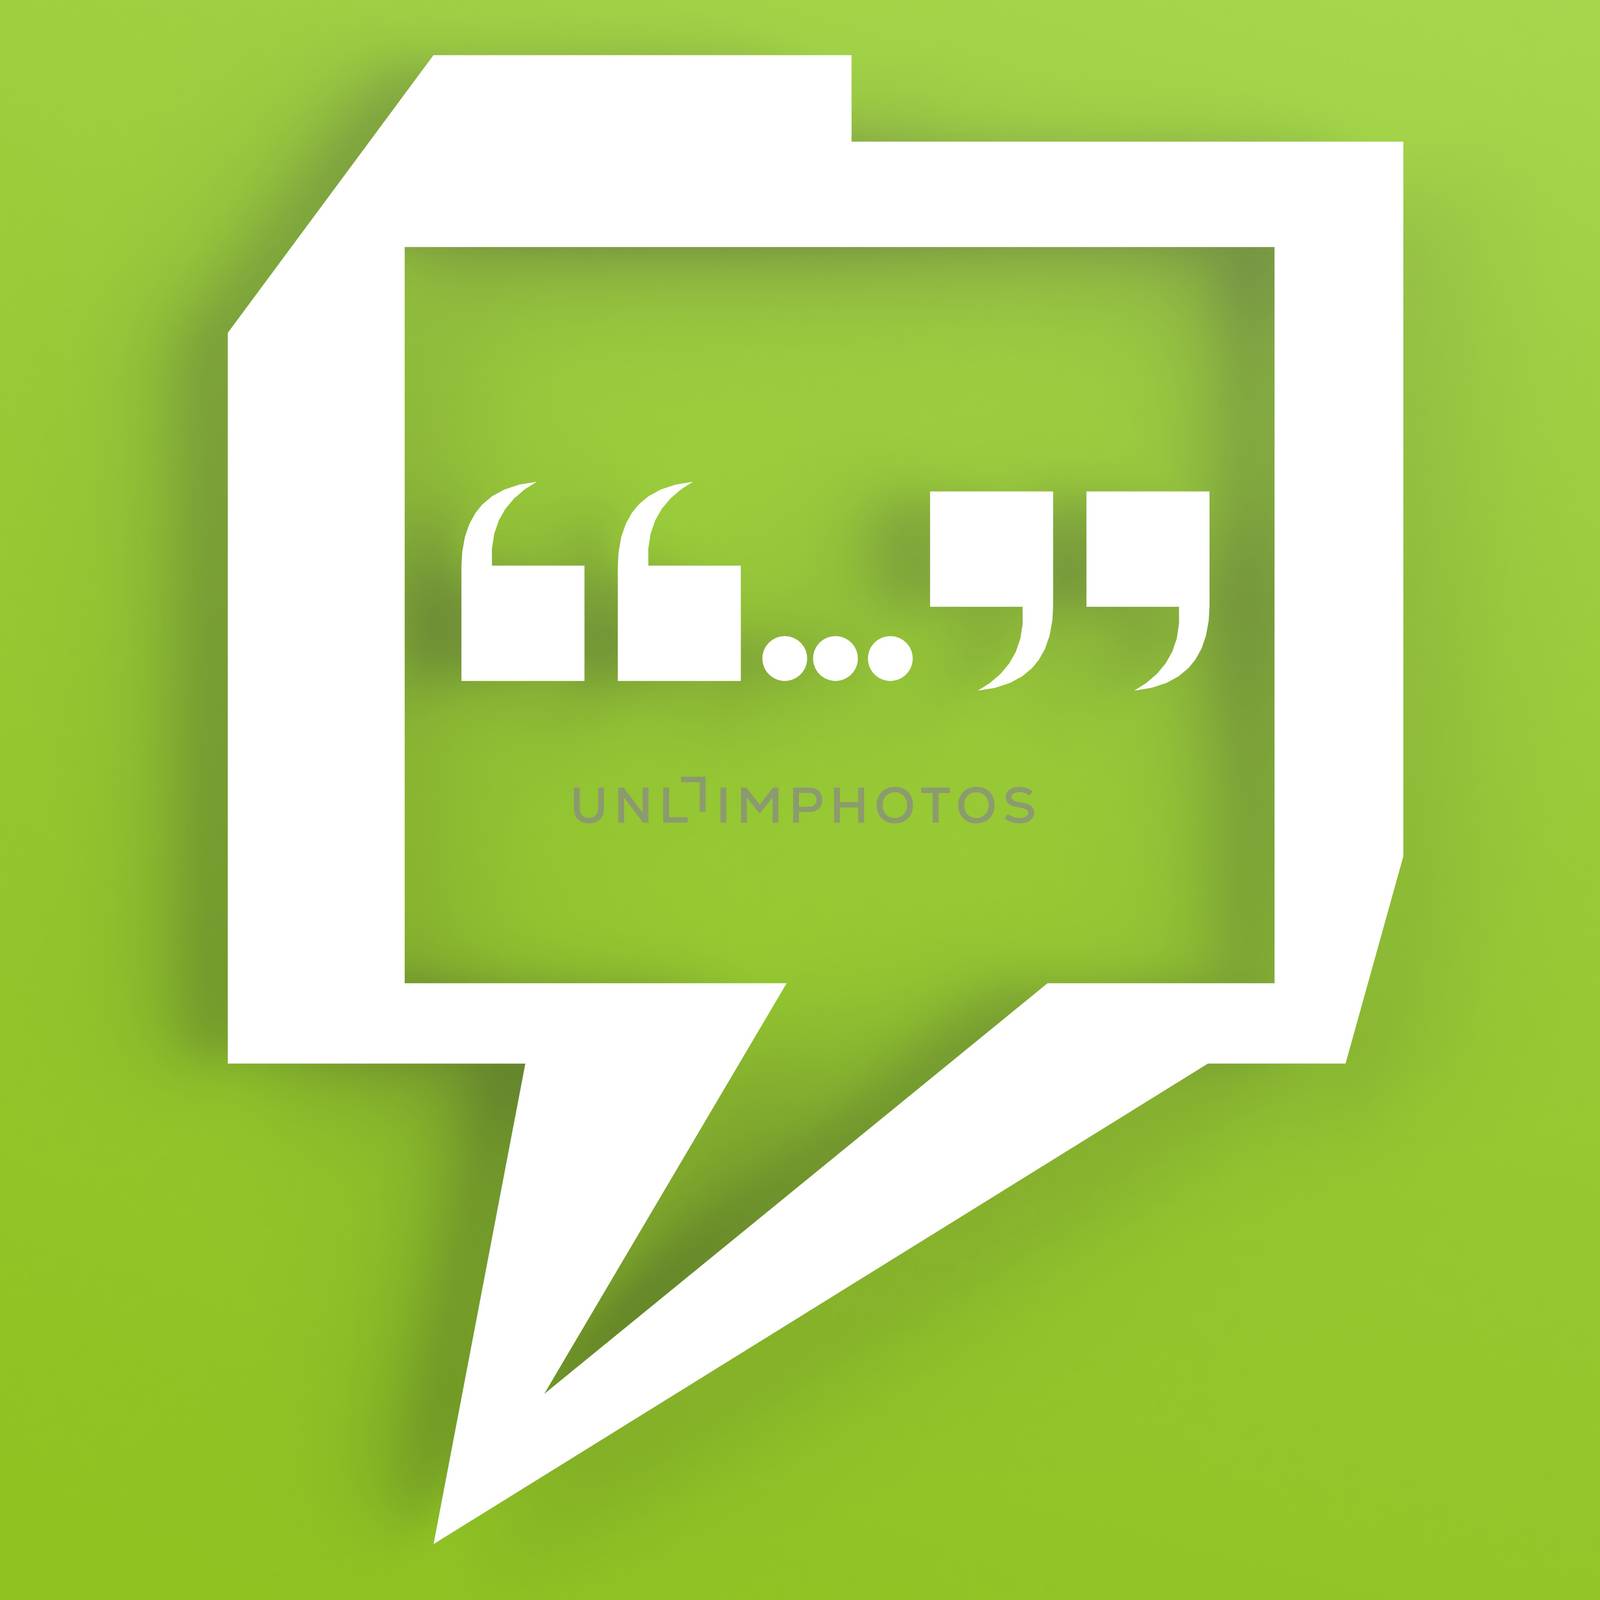 Speech bubble with green color background